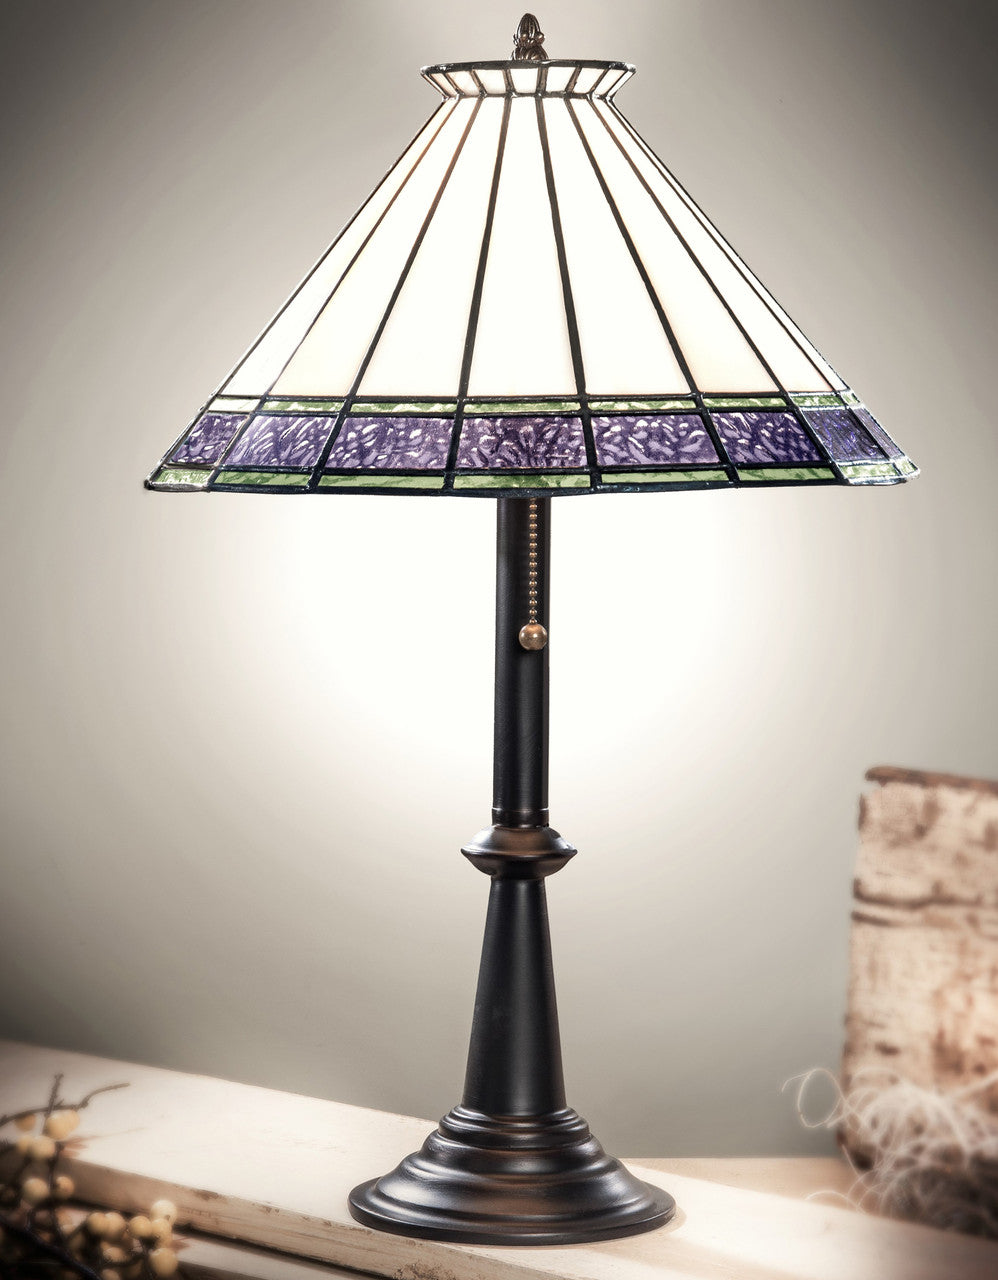 Purple Tiffany Stained Glass Table Lamp |  LAM 654-3 TB